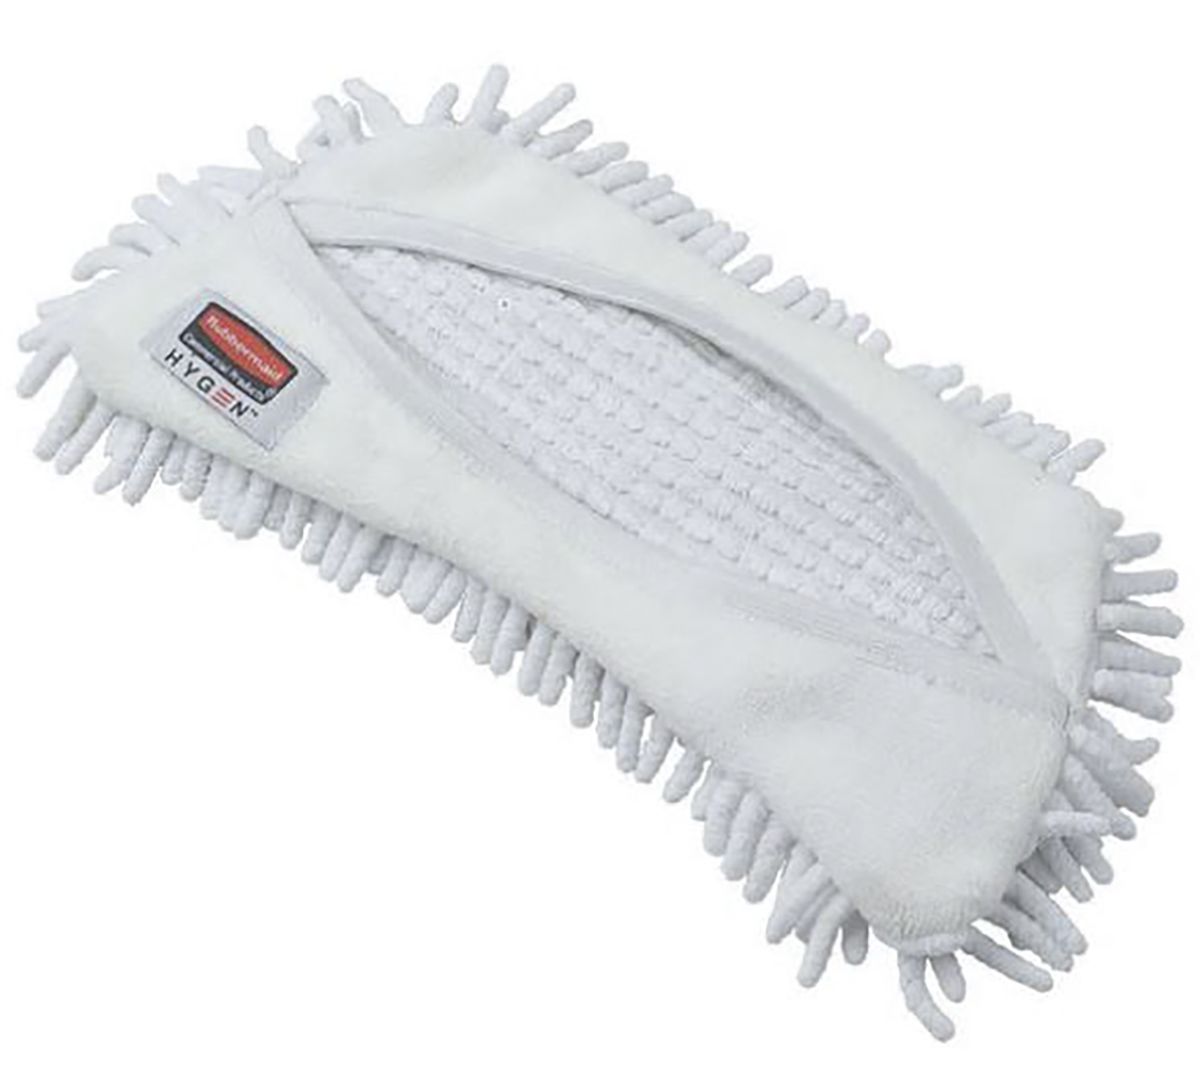 Rubbermaid Commercial Products White Microfibre Mop Cover for use with Rubbermaid HYGEN™ Quick-Connect handles